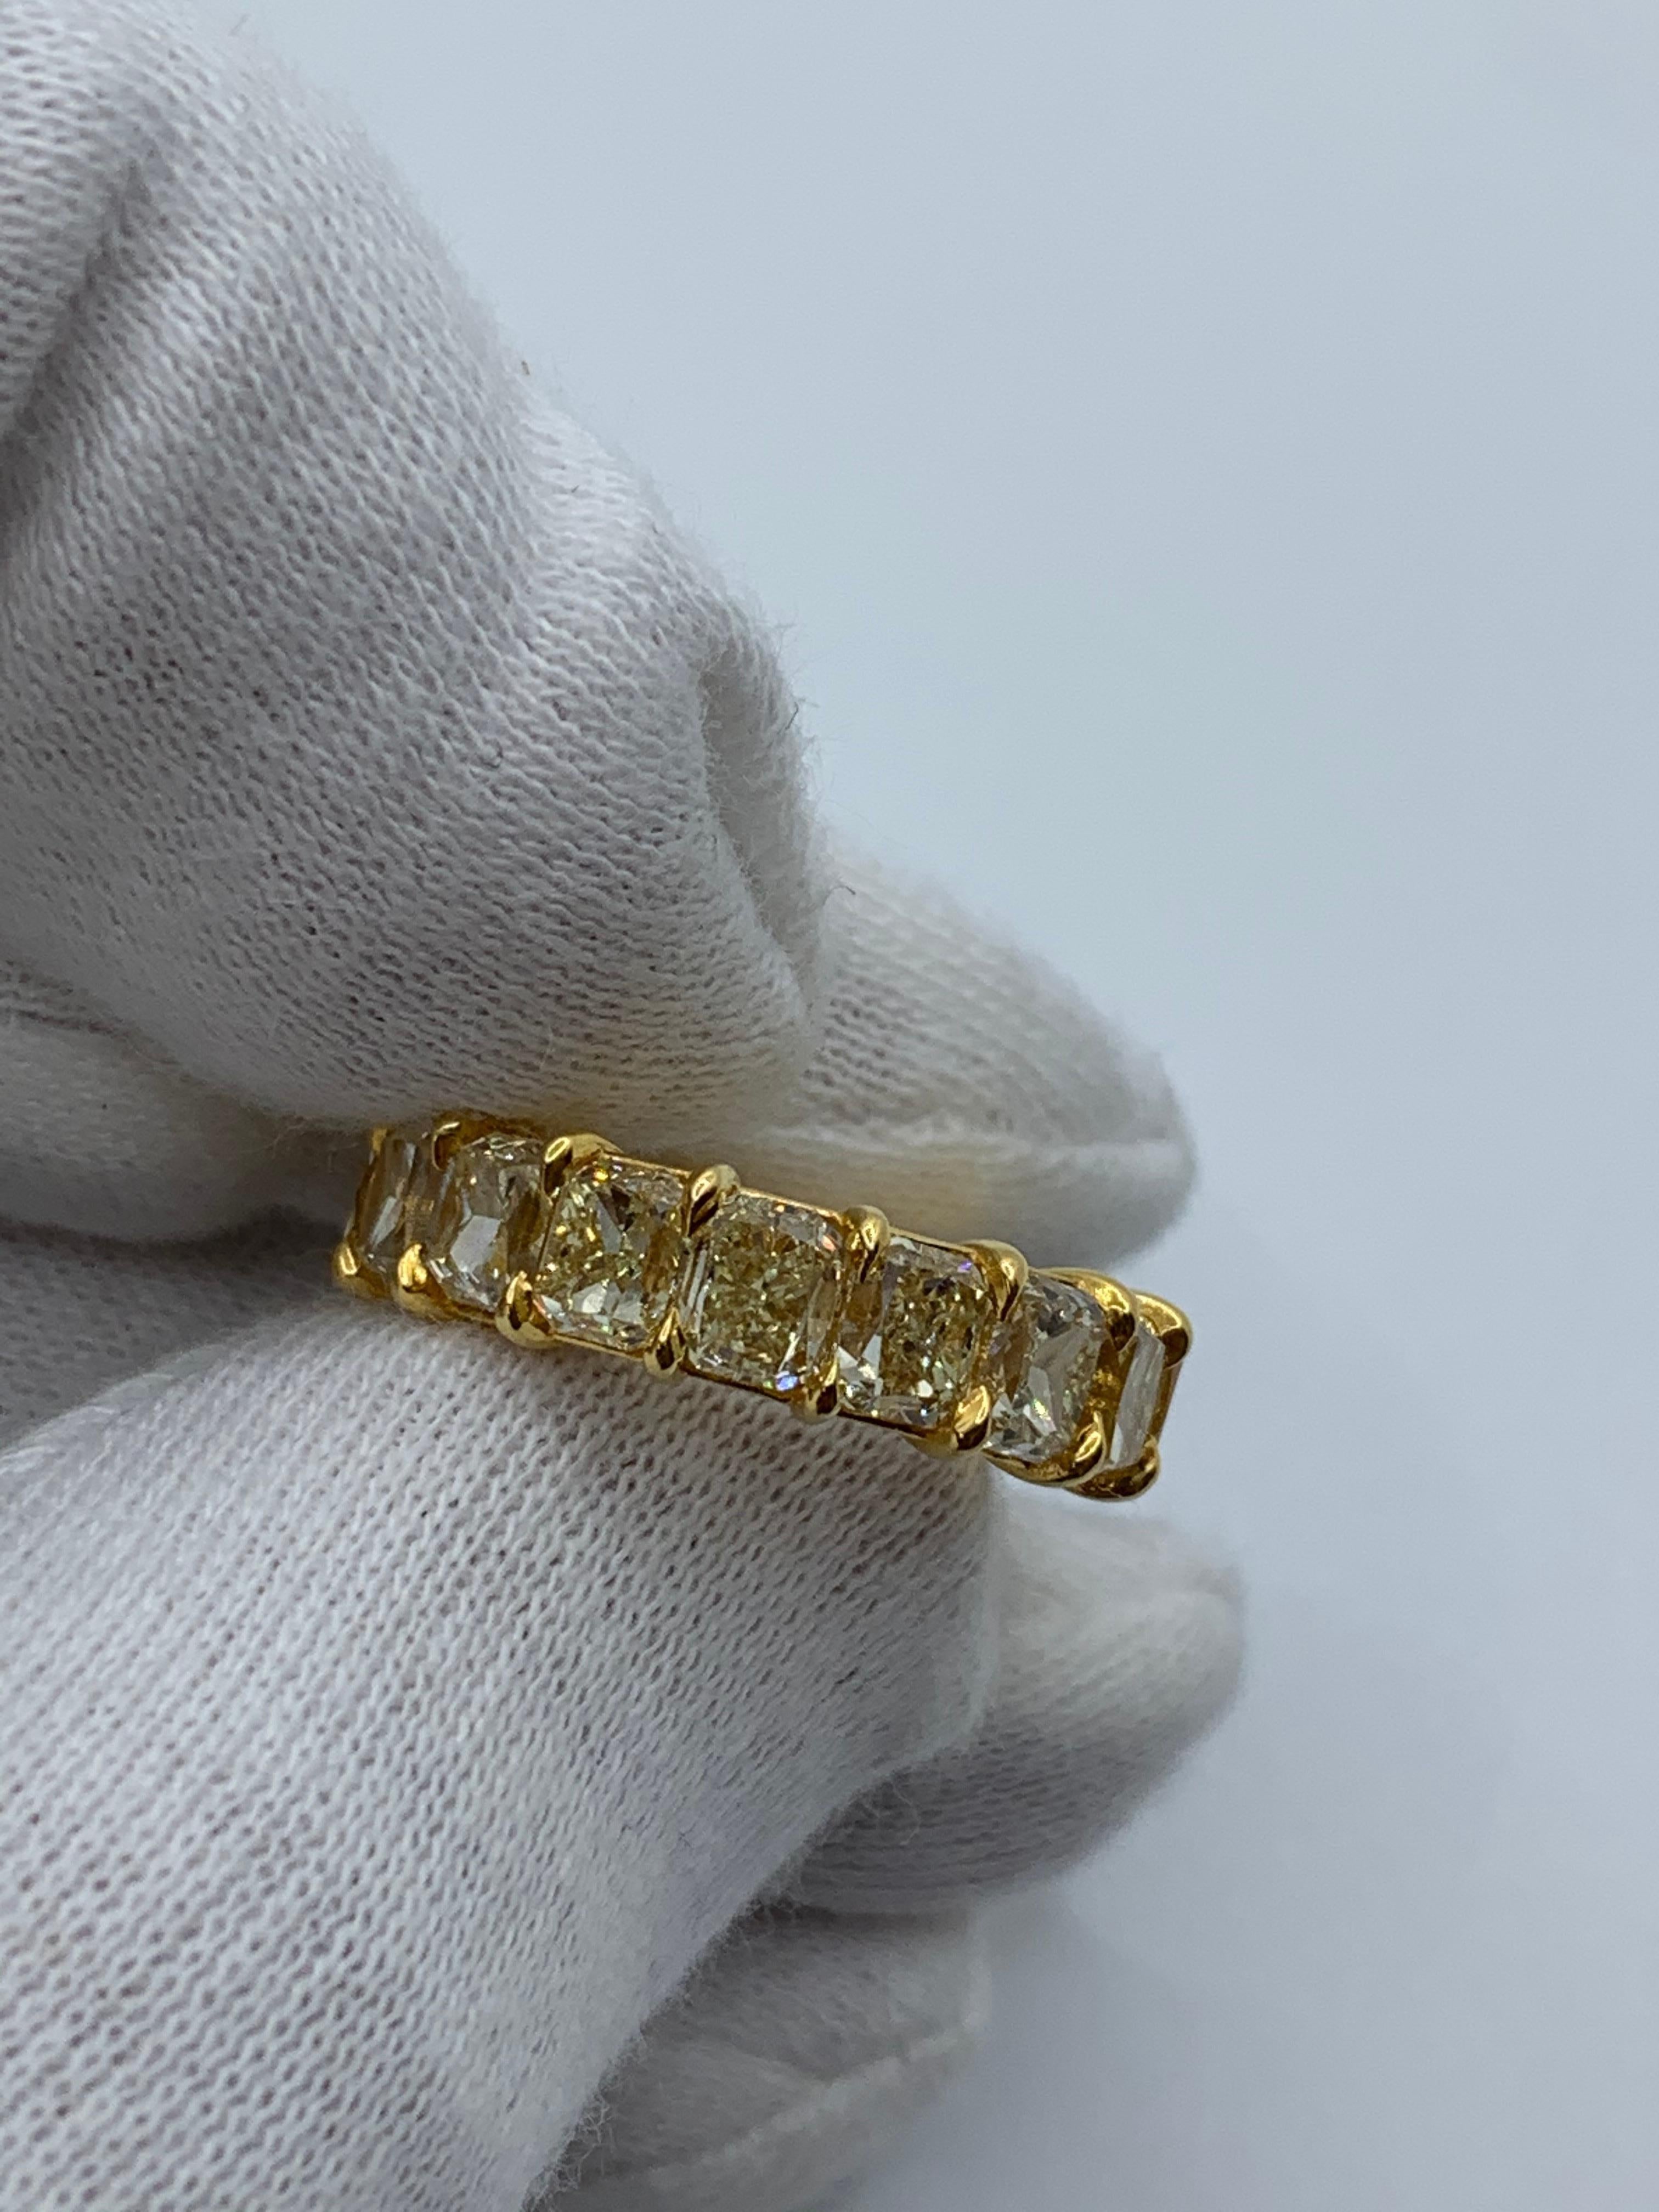 This Eternity Ring features 17 perfectly matched Radiant Cut Fancy Yellow Diamonds weighing 10.96 Carats. Average is 65 Points each.
Diamonds are of VS Clarity.
Set in 18 Karat Yellow Gold.
Size 6.25